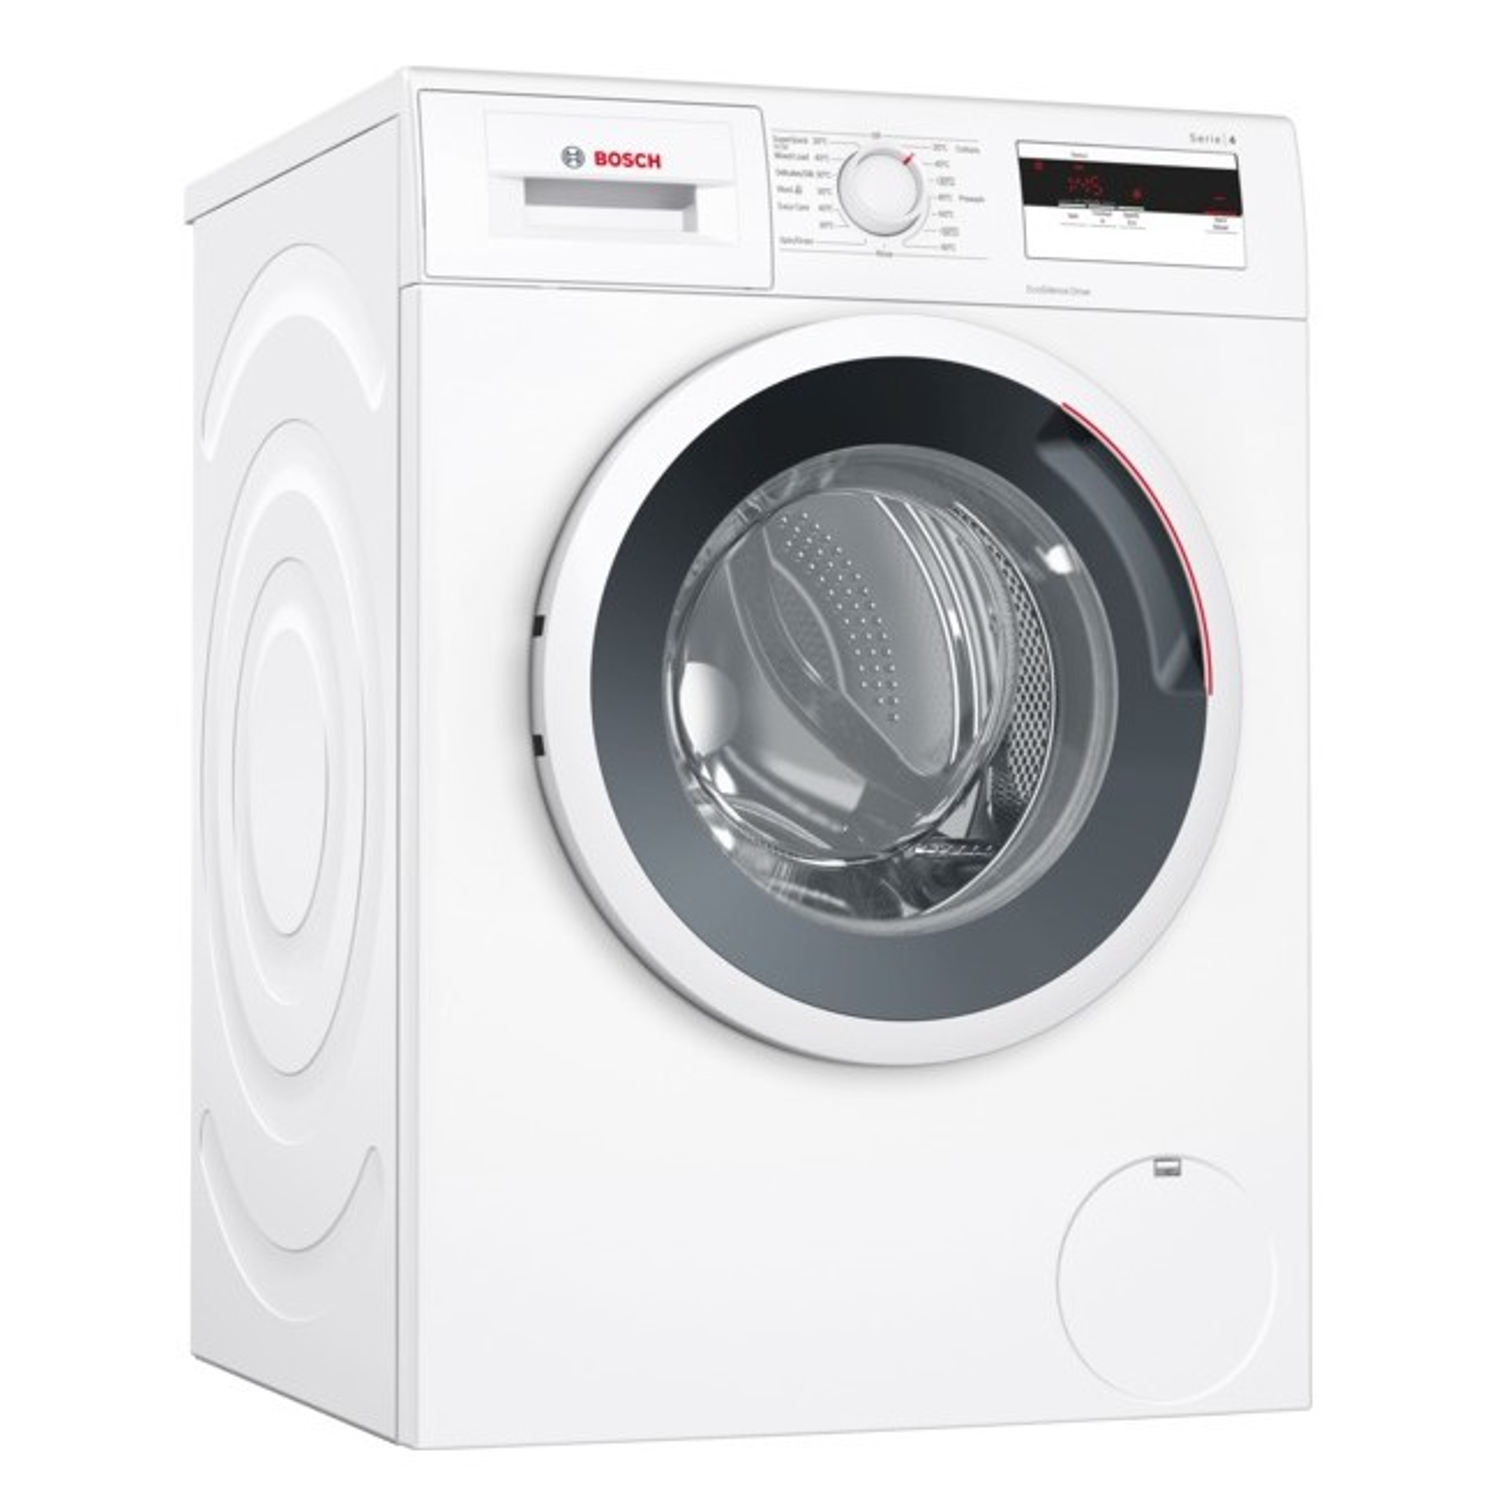 Bosch 7kg 1400 Spin Washing Machine - White - A+++ Rated - 0